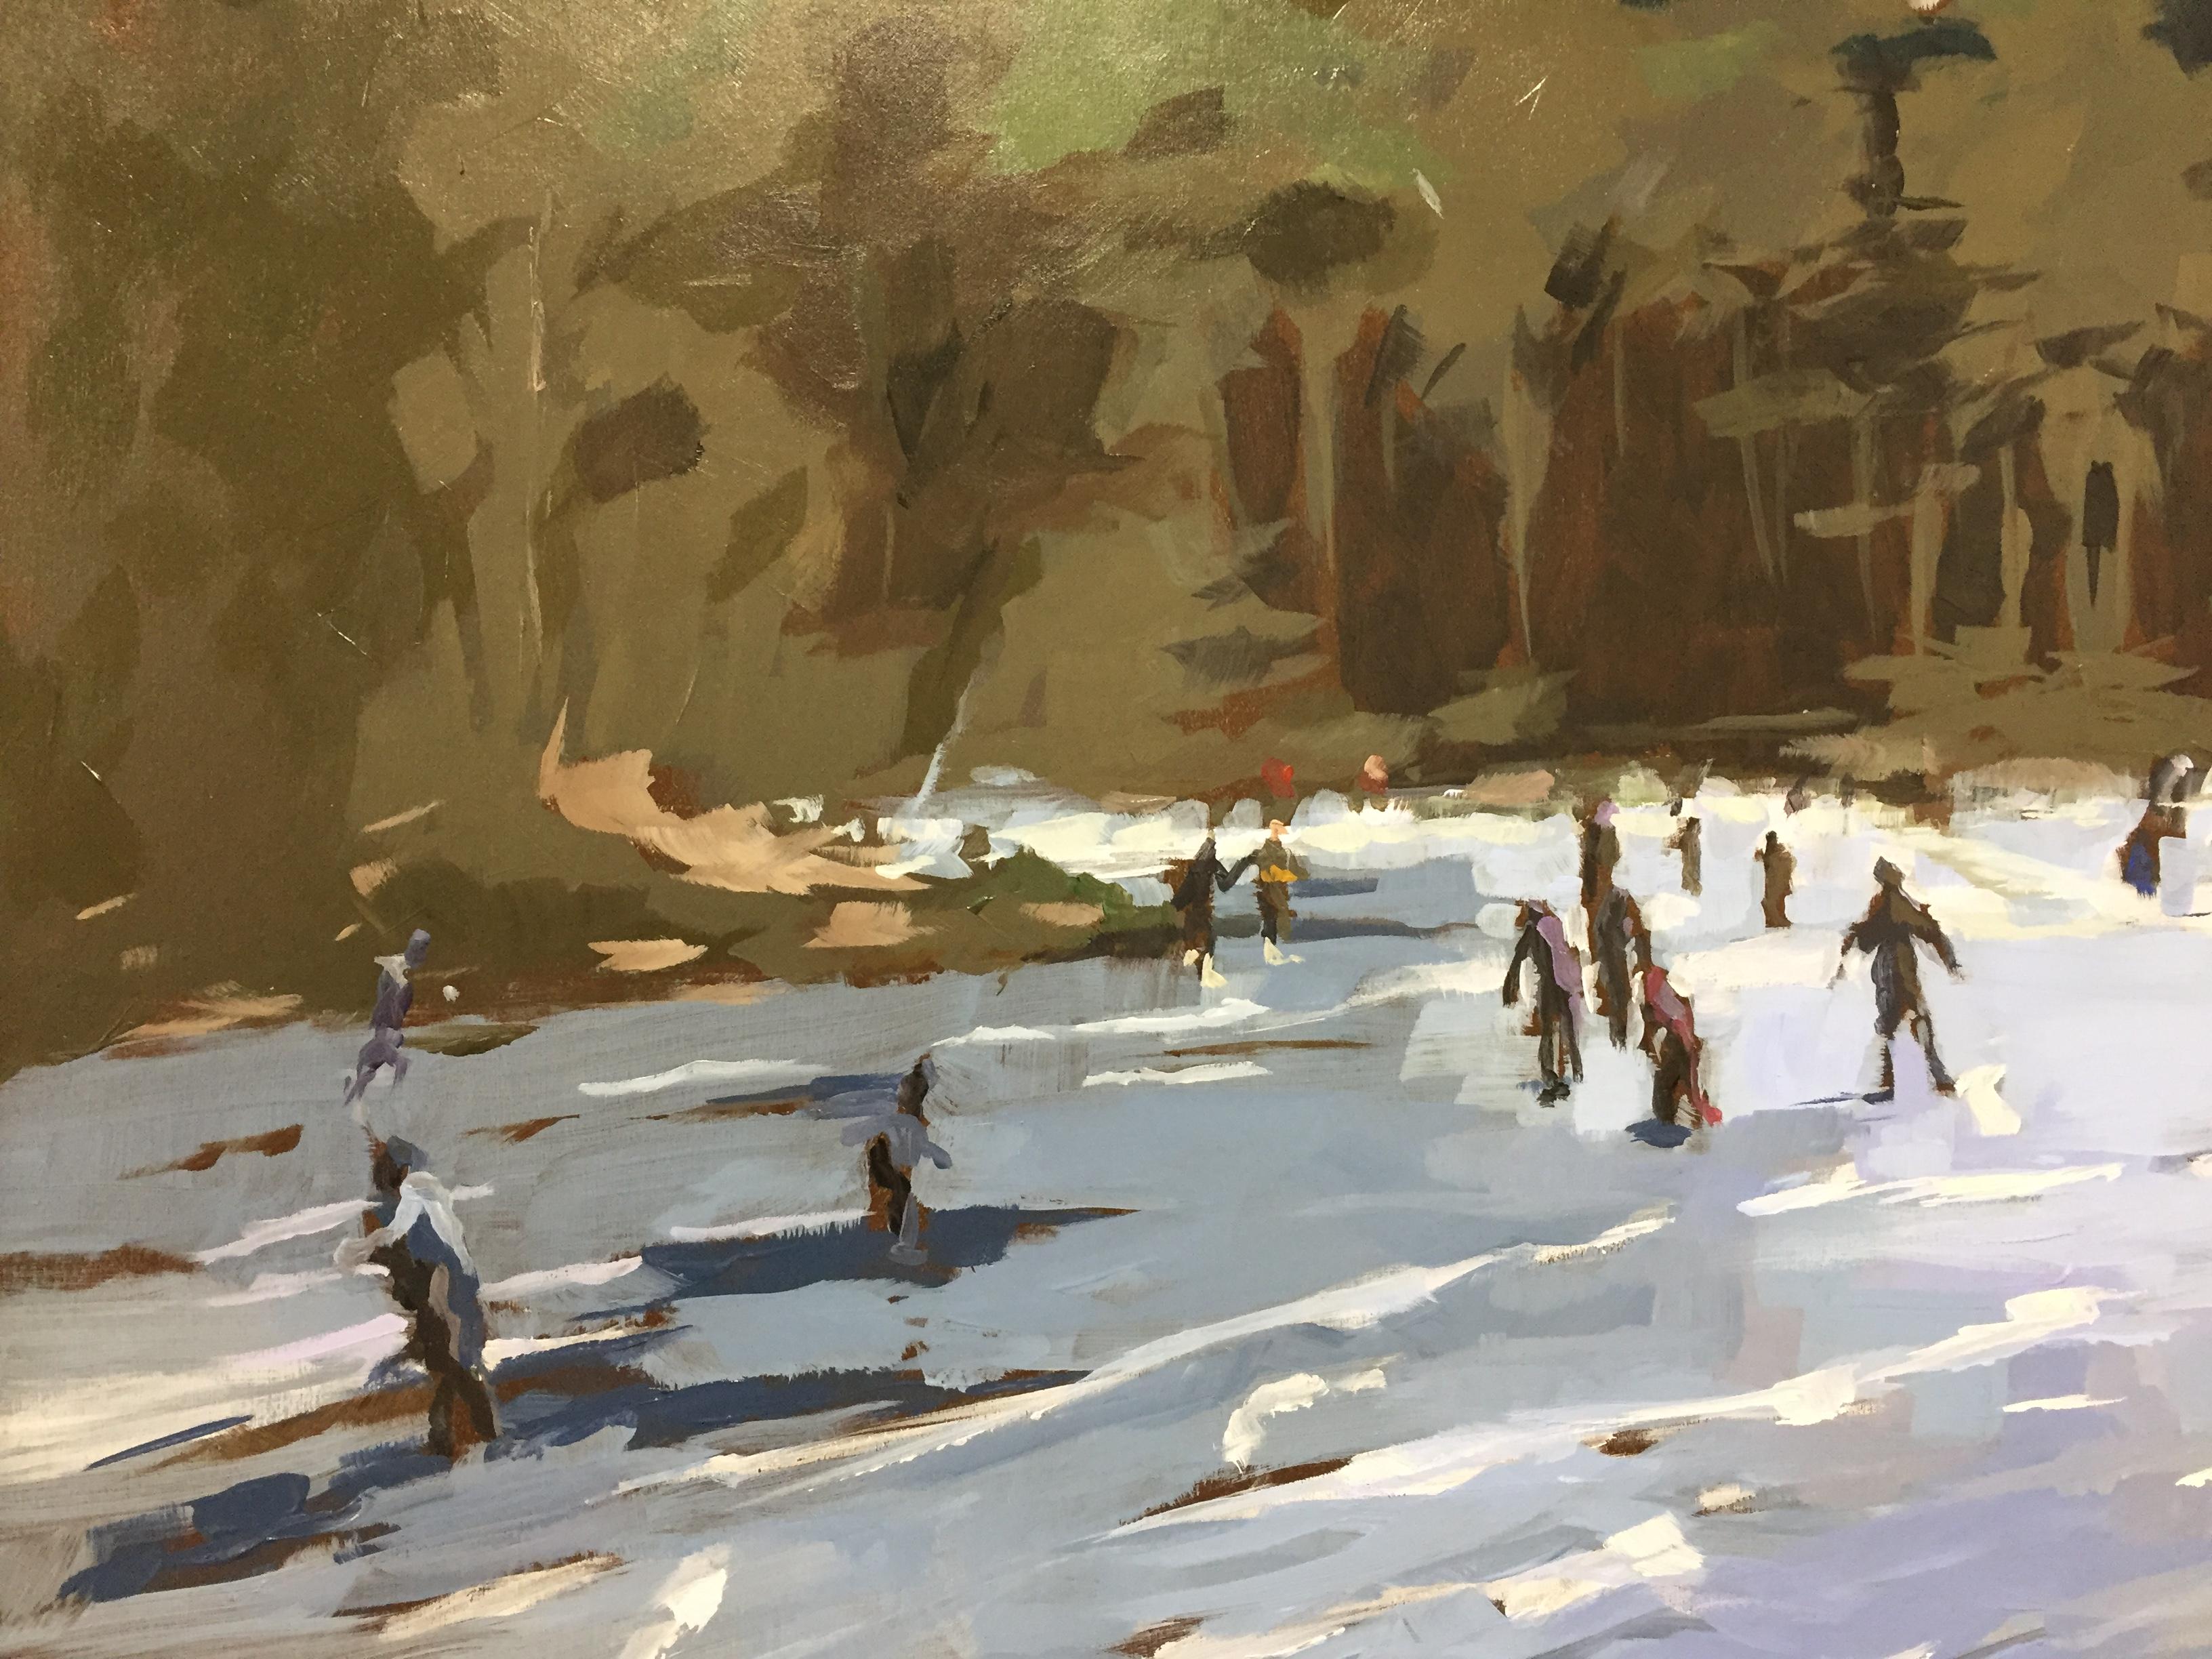 The artist Mitzy Renooy in this painting shows skating people in a landscape with ice and small traces of snow, trees, heather and leaves. The focus is on the skating children in this painting, they really seem to move.

This painting makes an